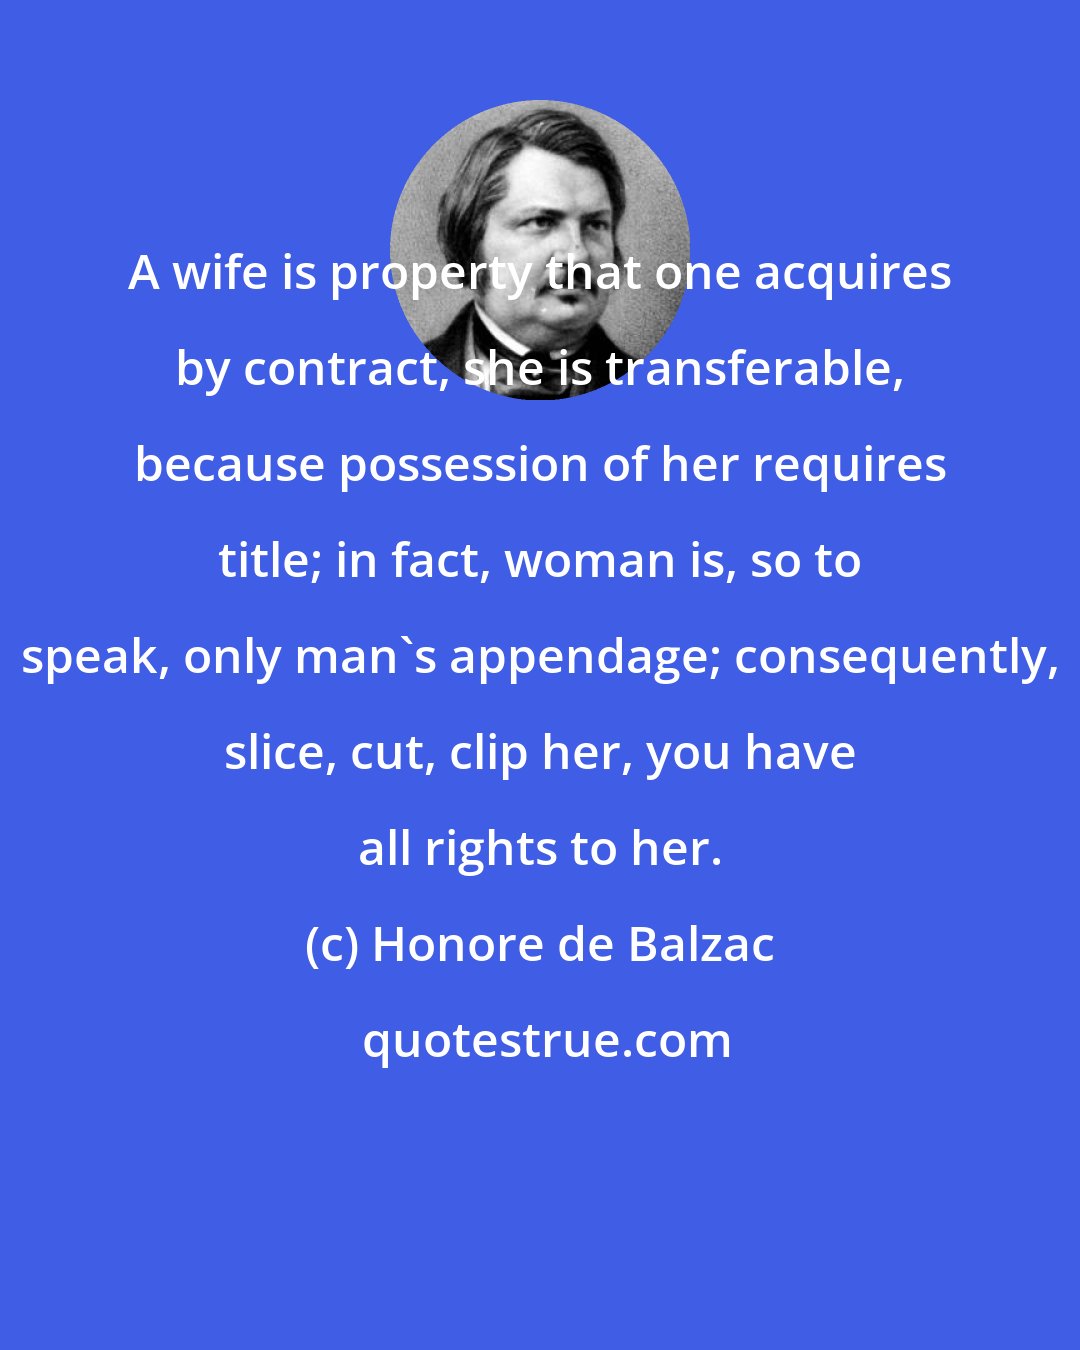 Honore de Balzac: A wife is property that one acquires by contract, she is transferable, because possession of her requires title; in fact, woman is, so to speak, only man's appendage; consequently, slice, cut, clip her, you have all rights to her.